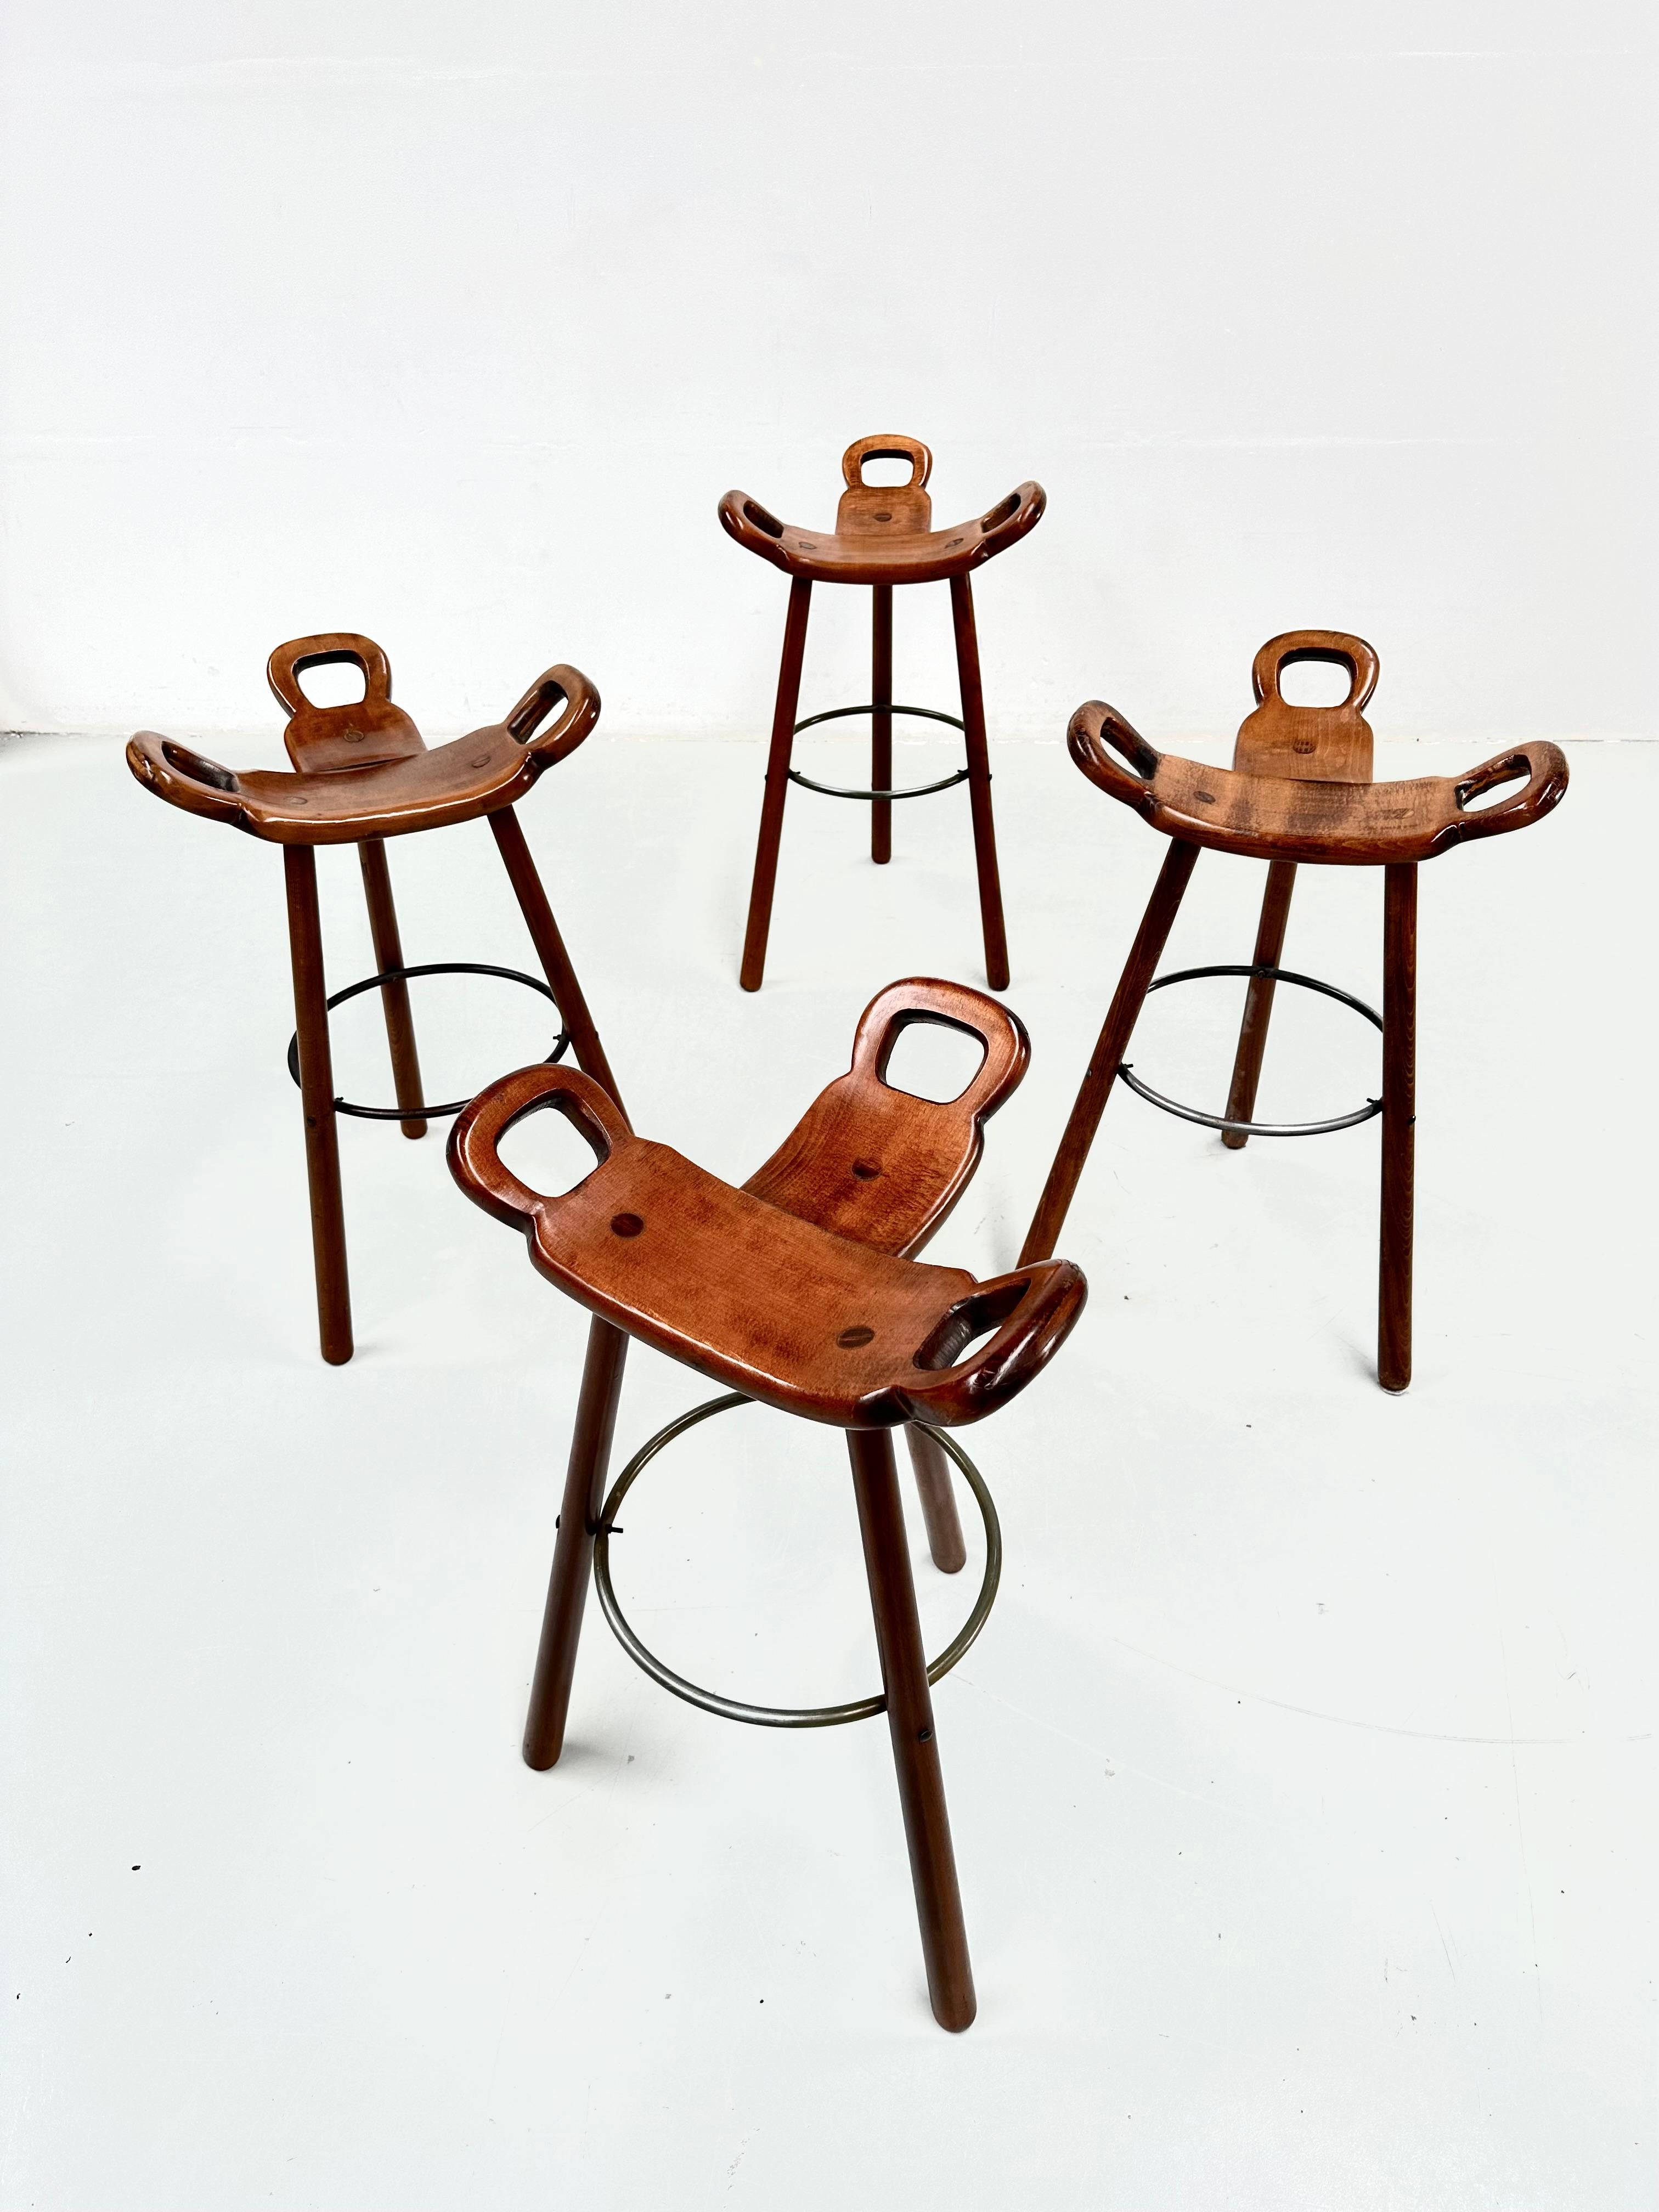 Set of 4 Marbella Brutalist Stools by Sergio Rodrigues for Confonorm 1970s. 3